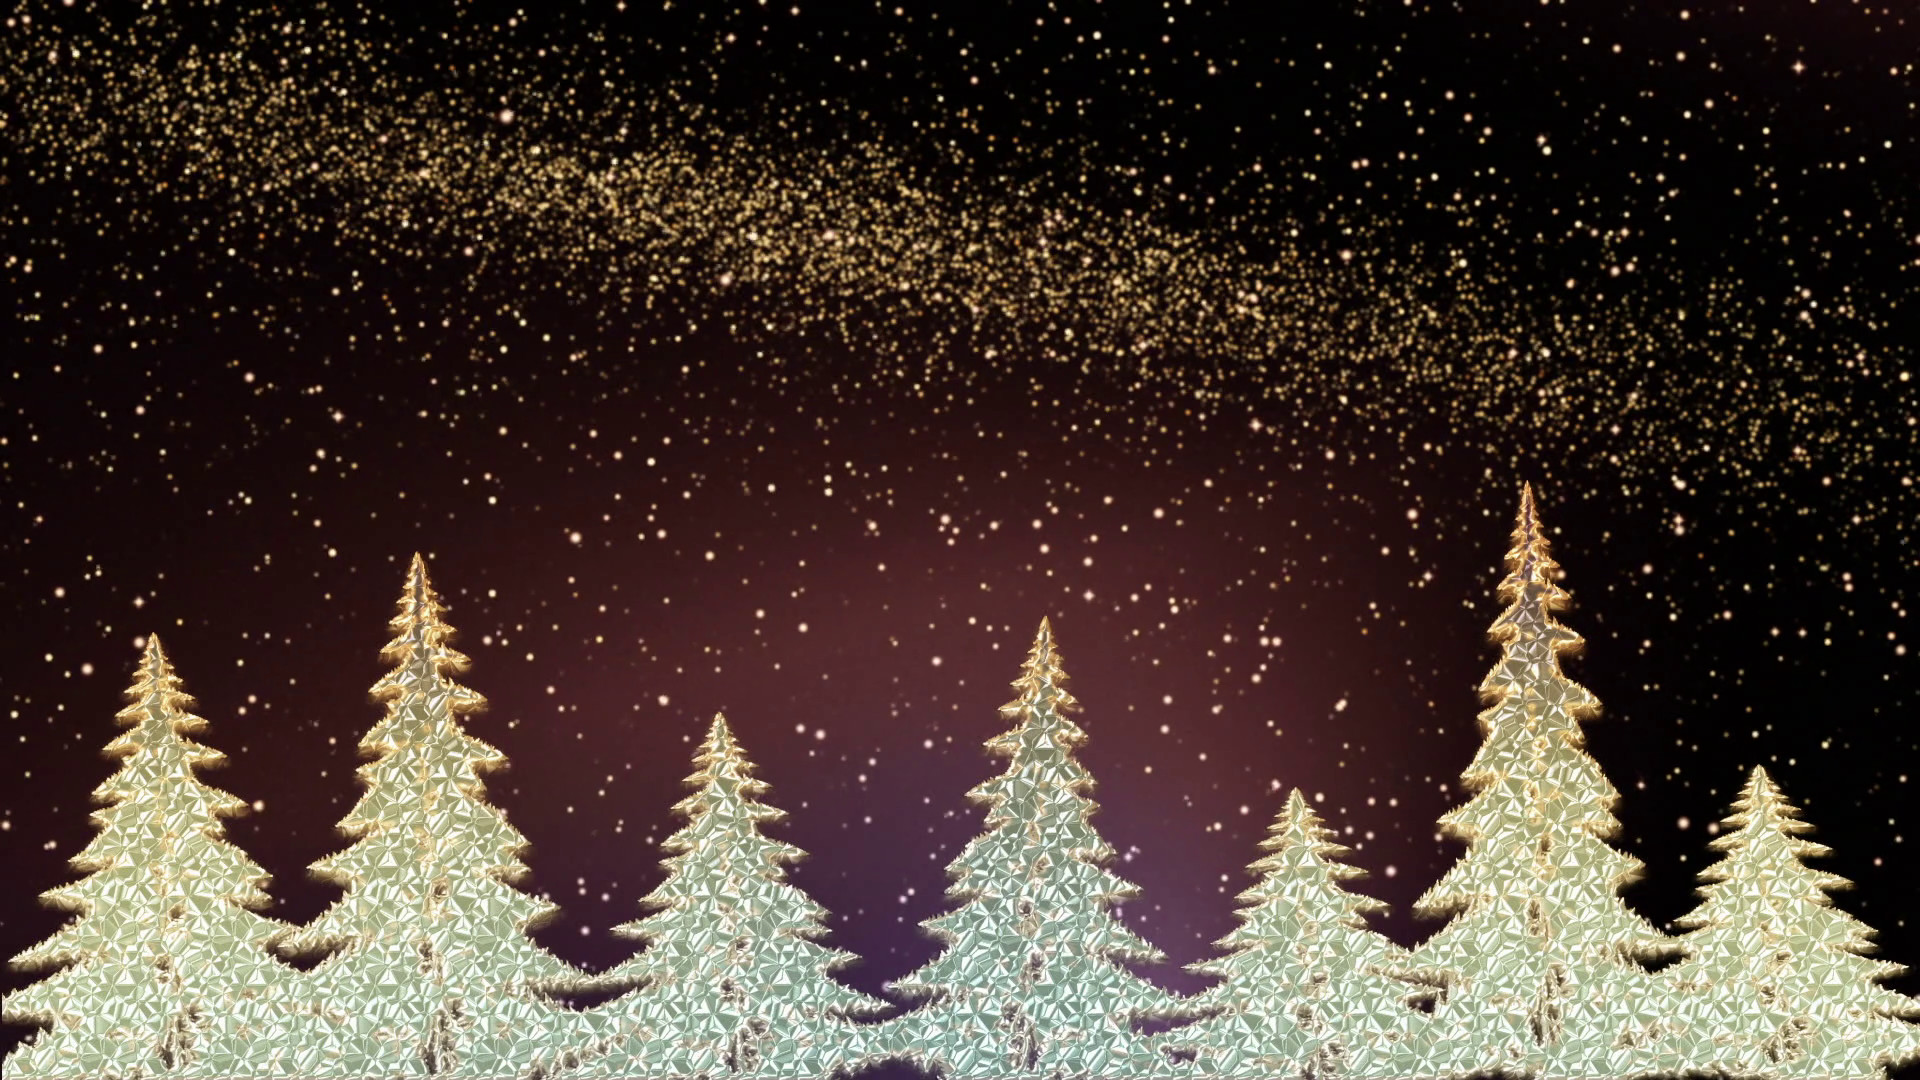 1920x1080 Sparkling Christmas trees shining in the snowy night, Christmas trees with  the stardust in the starry night, background, winter magical seasonal scene  with ...